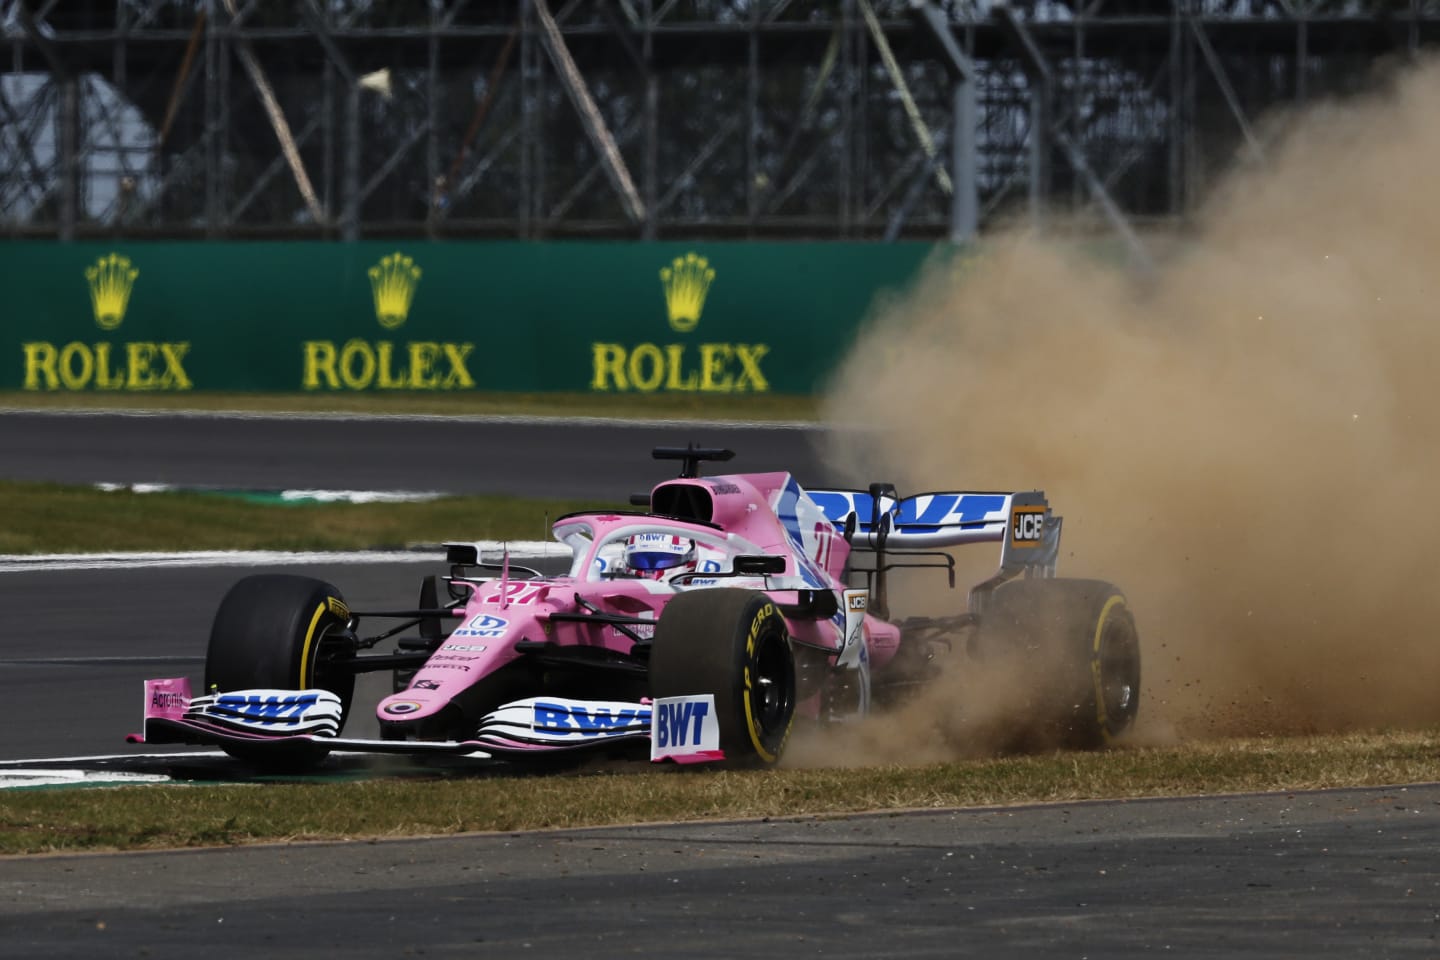 NORTHAMPTON, ENGLAND - AUGUST 08: Nico Hulkenberg of Germany driving the (27) Racing Point RP20 Mercedes runs wide during qualifying for the F1 70th Anniversary Grand Prix at Silverstone on August 08, 2020 in Northampton, England. (Photo by Frank Augstein/Pool via Getty Images)